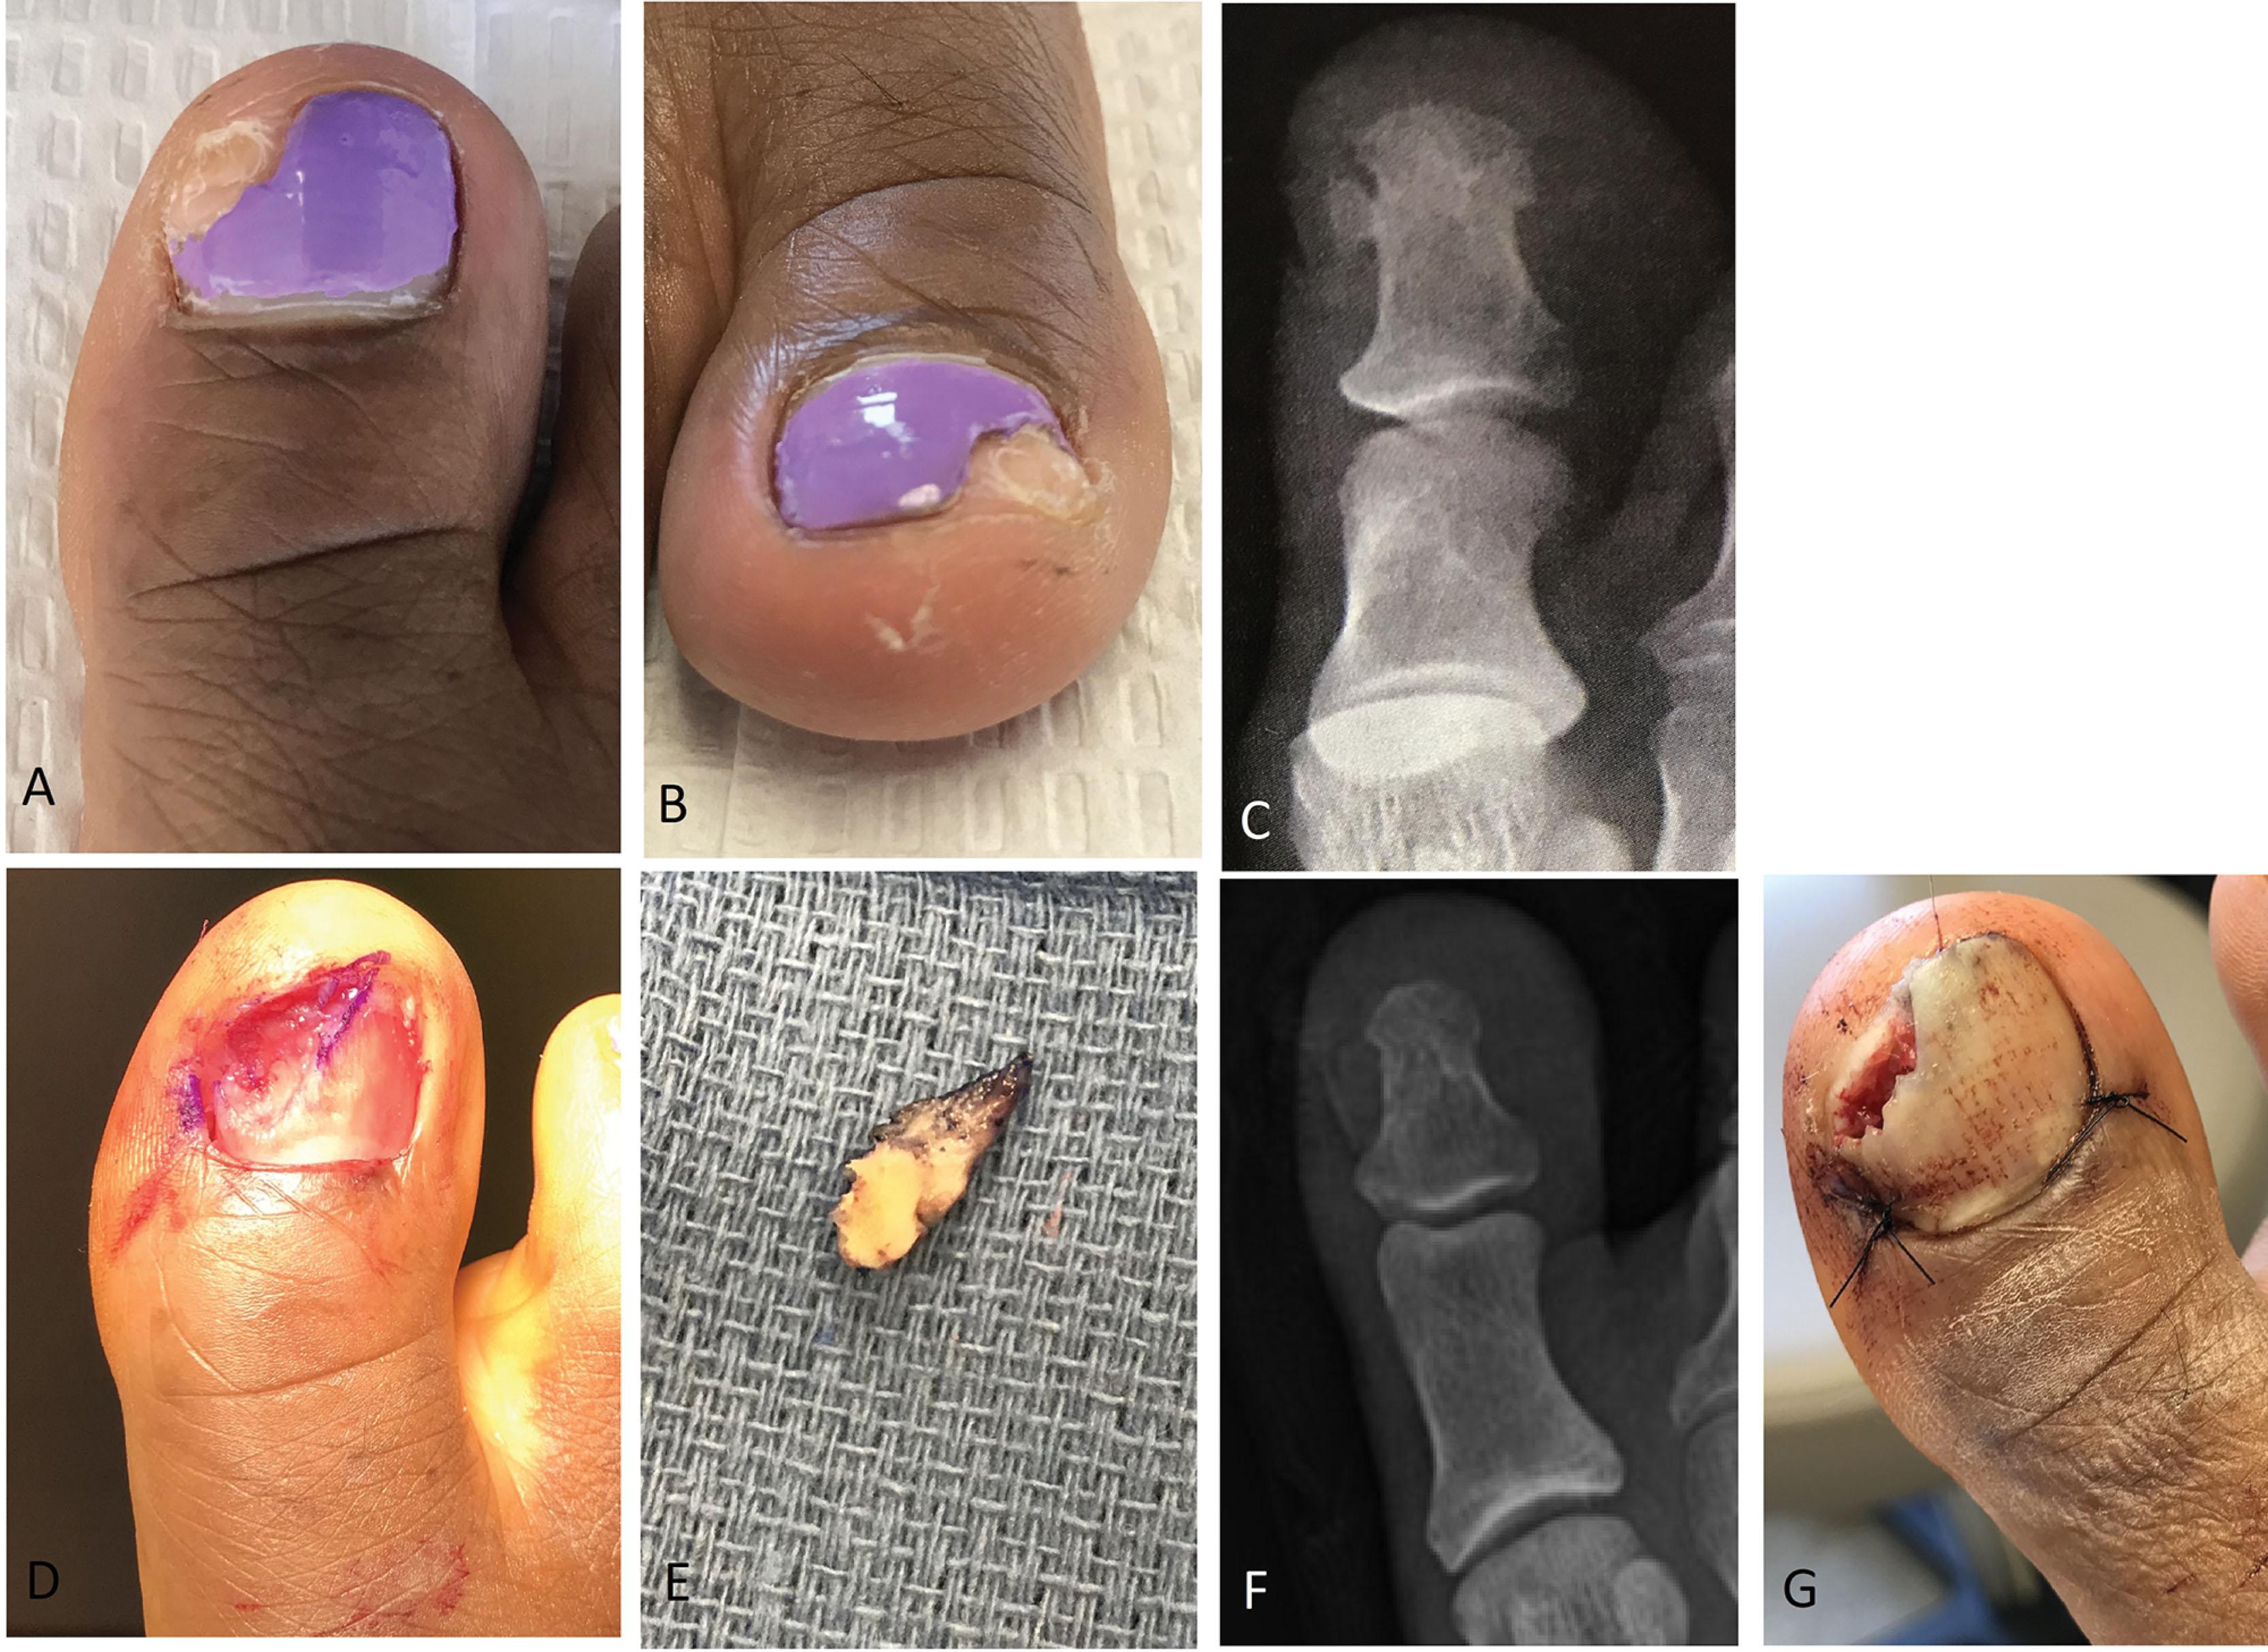 Fig. 14-18, Technique for surgical excision of subungual exostosis with healing by secondary intention. A and B , Clinical appearance of a painful lesion affecting the dorsomedial right hallux nail plate in 40-year-old female. C , Oblique X-ray demonstrating the dorsomedial location of the exostosis. D and E , The toenail is completely avulsed to expose the nail bed and underlying exostosis. Converging semi-elliptical incisions are performed down to bone and the ellipse of nail bed is removed from the field to expose the bony lesion. F , Exostosis is excised with wide margins. G , The wound is packed with collagen substitute, and the nail plate is re-affixed and placed back under the proximal fold to act as an initial scaffold for the new nail plate and to protect the nail bed.